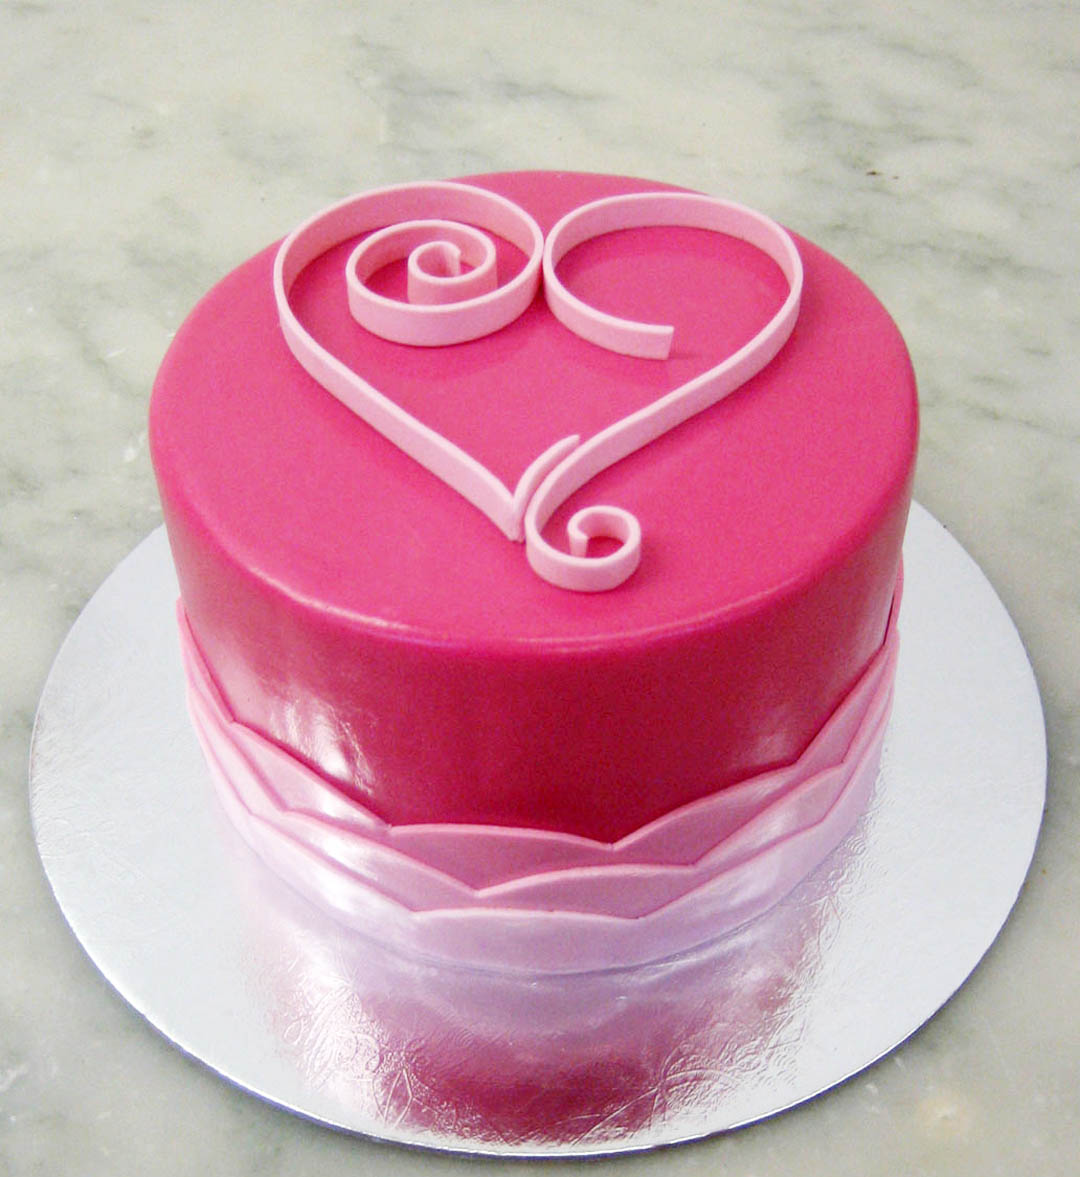 Rosette Cake for Valentine's Day or ANY